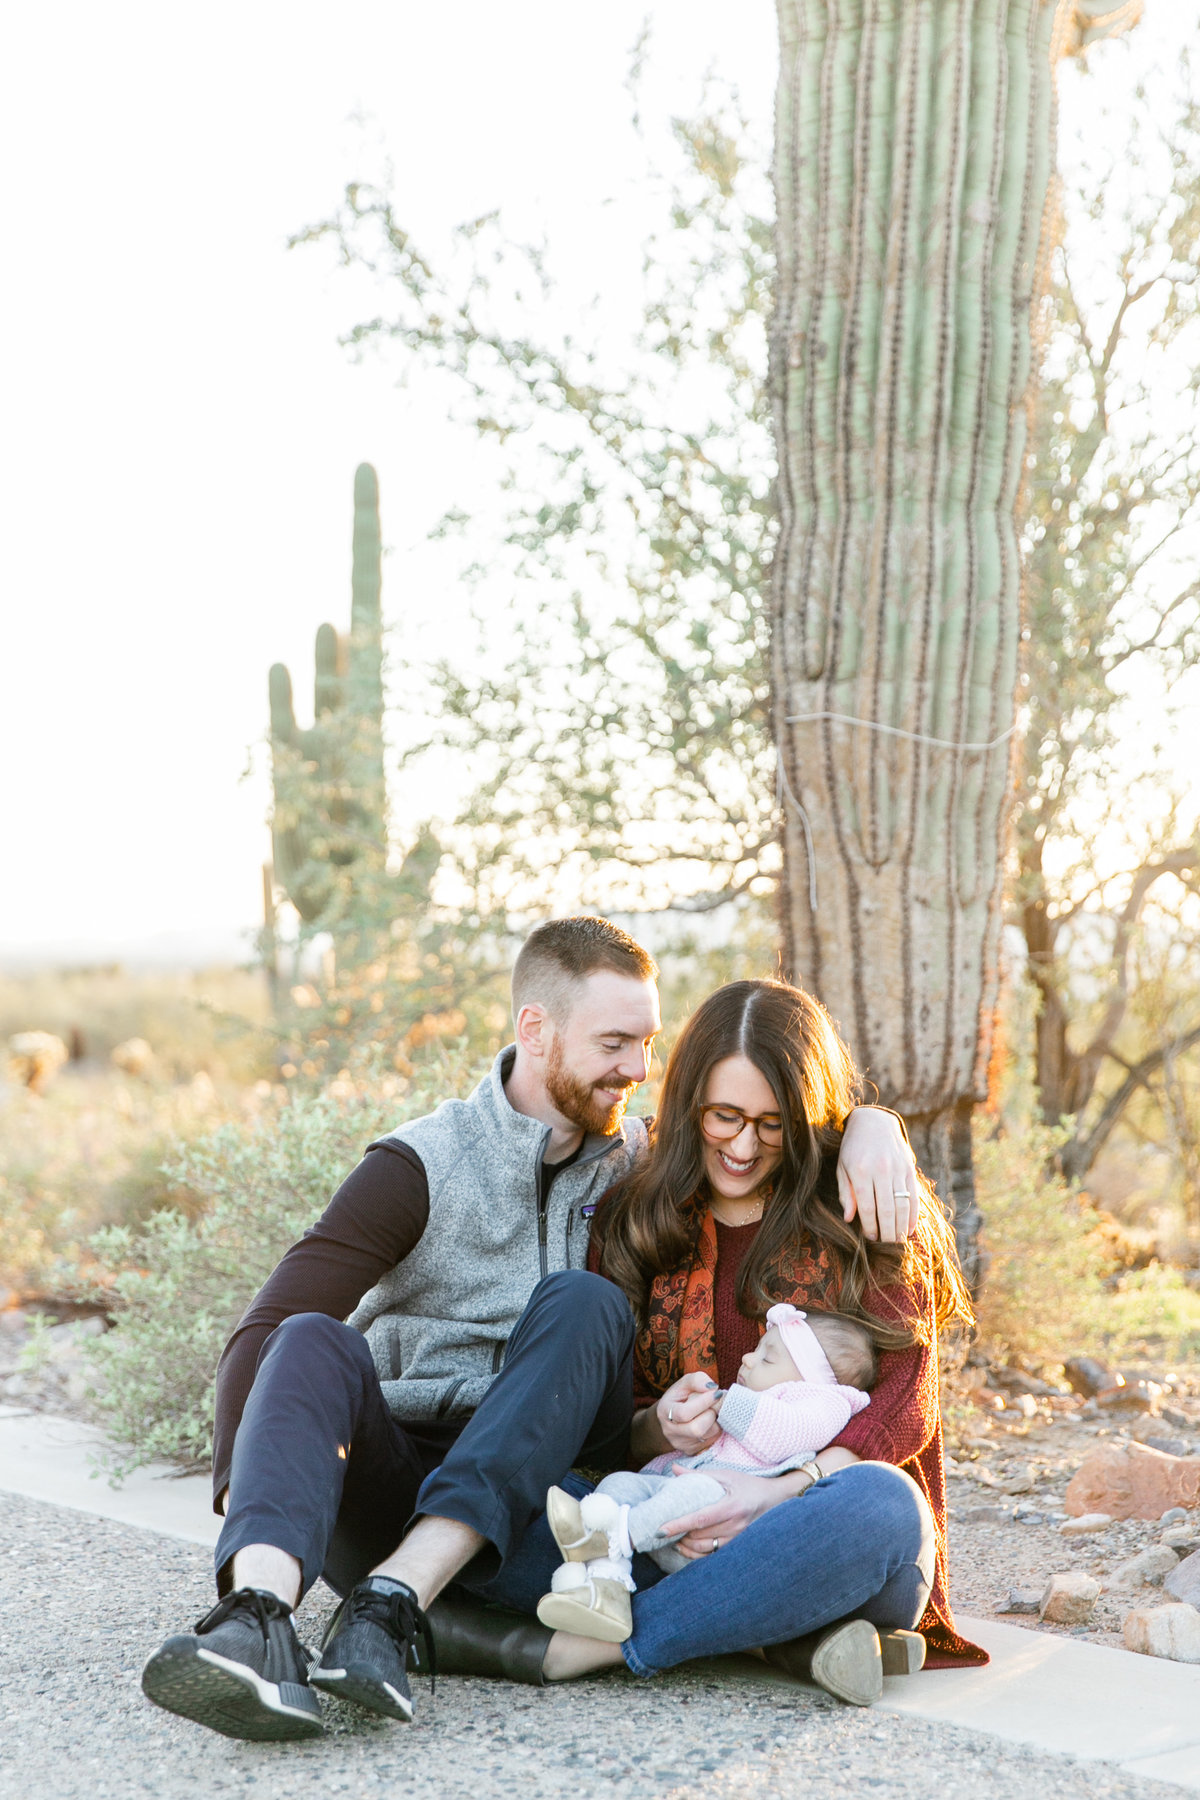 Karlie Colleen Photography - Scottsdale Family Photography - Lauren & Family-128